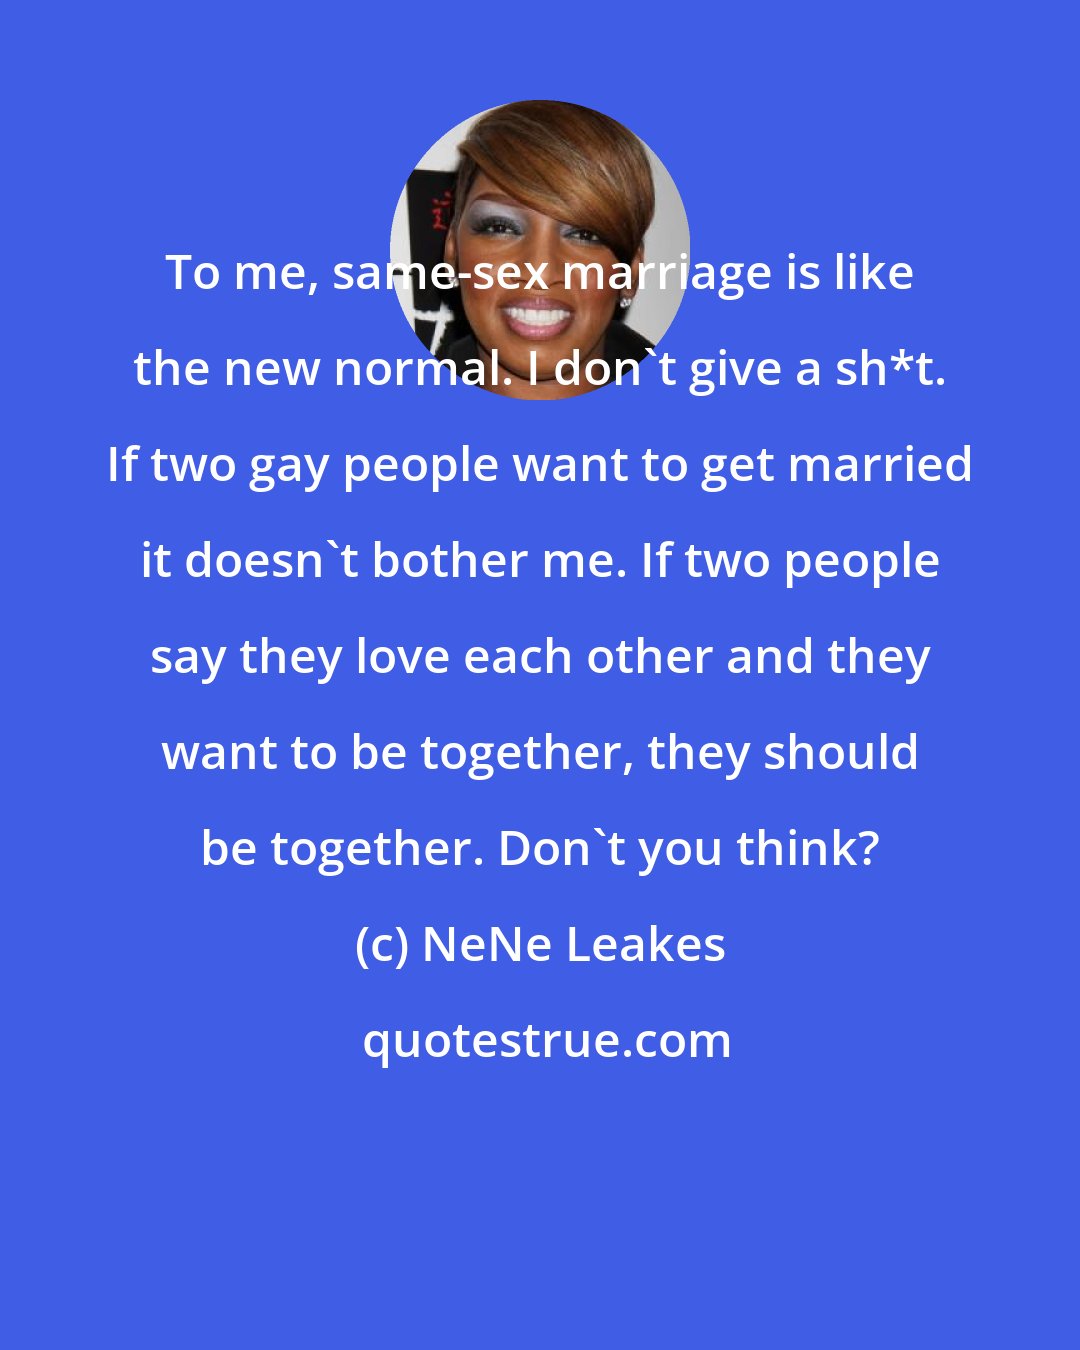 NeNe Leakes: To me, same-sex marriage is like the new normal. I don't give a sh*t. If two gay people want to get married it doesn't bother me. If two people say they love each other and they want to be together, they should be together. Don't you think?